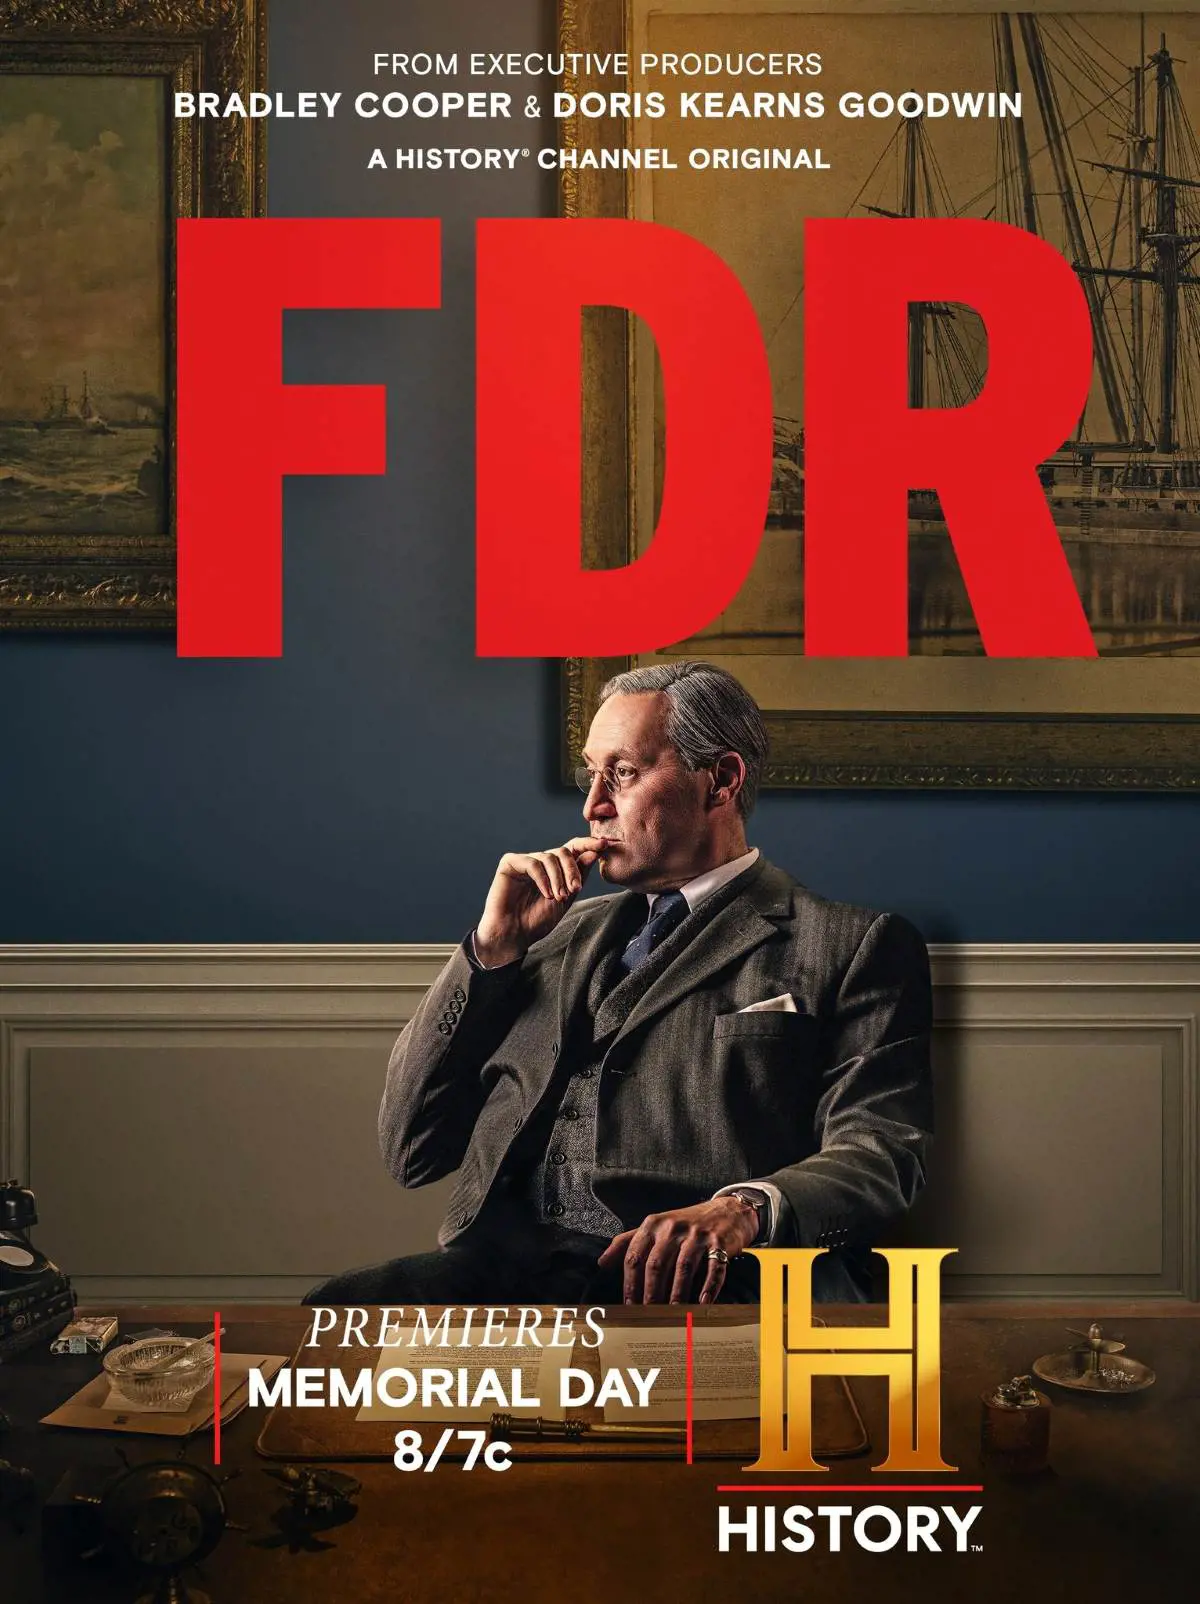 FDR is a three-part documentary miniseries, that chronicles the life of Franklin D. Roosevelt, the thirty-second President of the United States